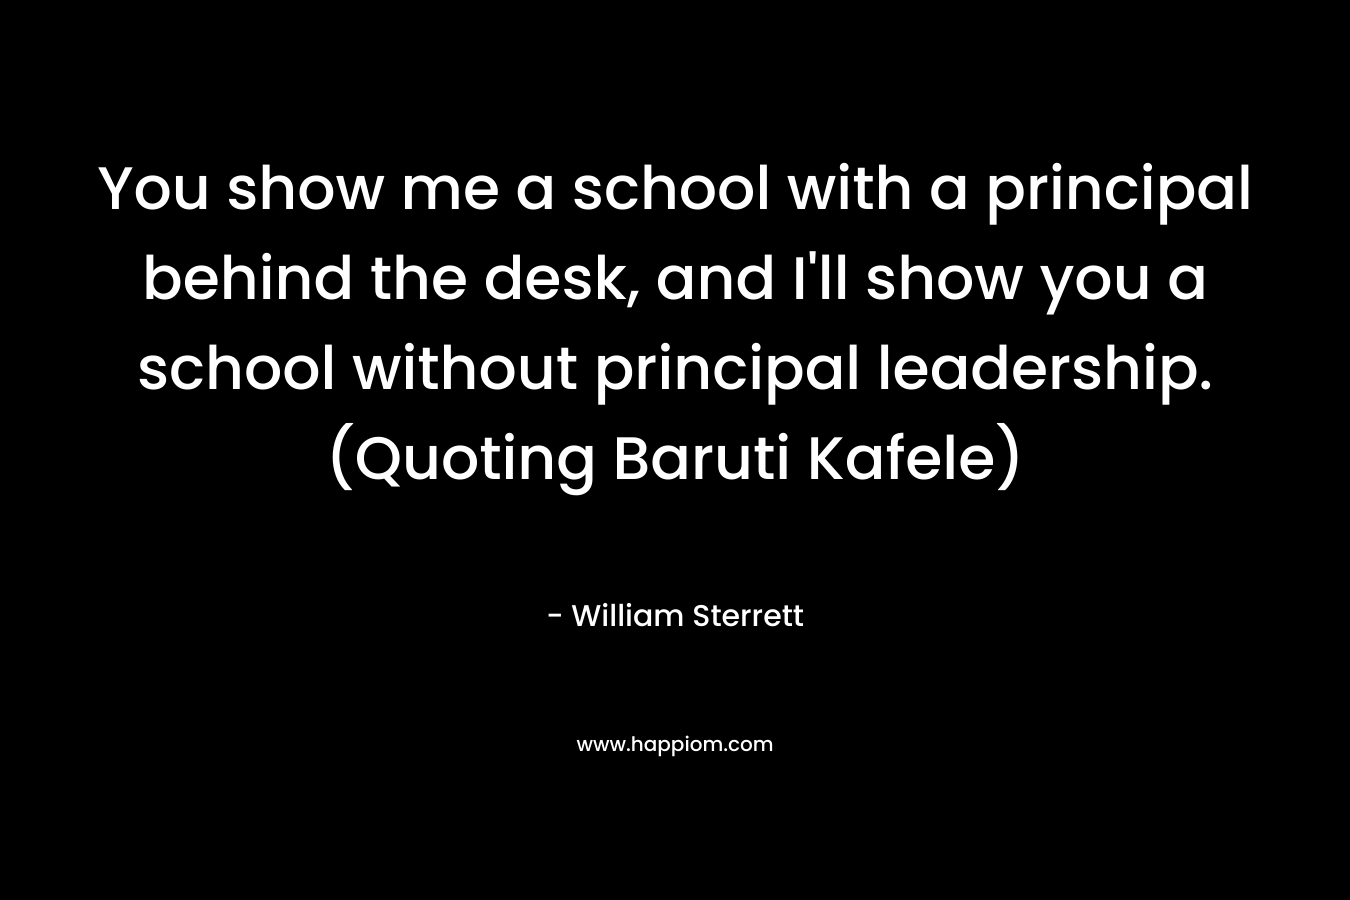 You show me a school with a principal behind the desk, and I’ll show you a school without principal leadership. (Quoting Baruti Kafele) – William Sterrett